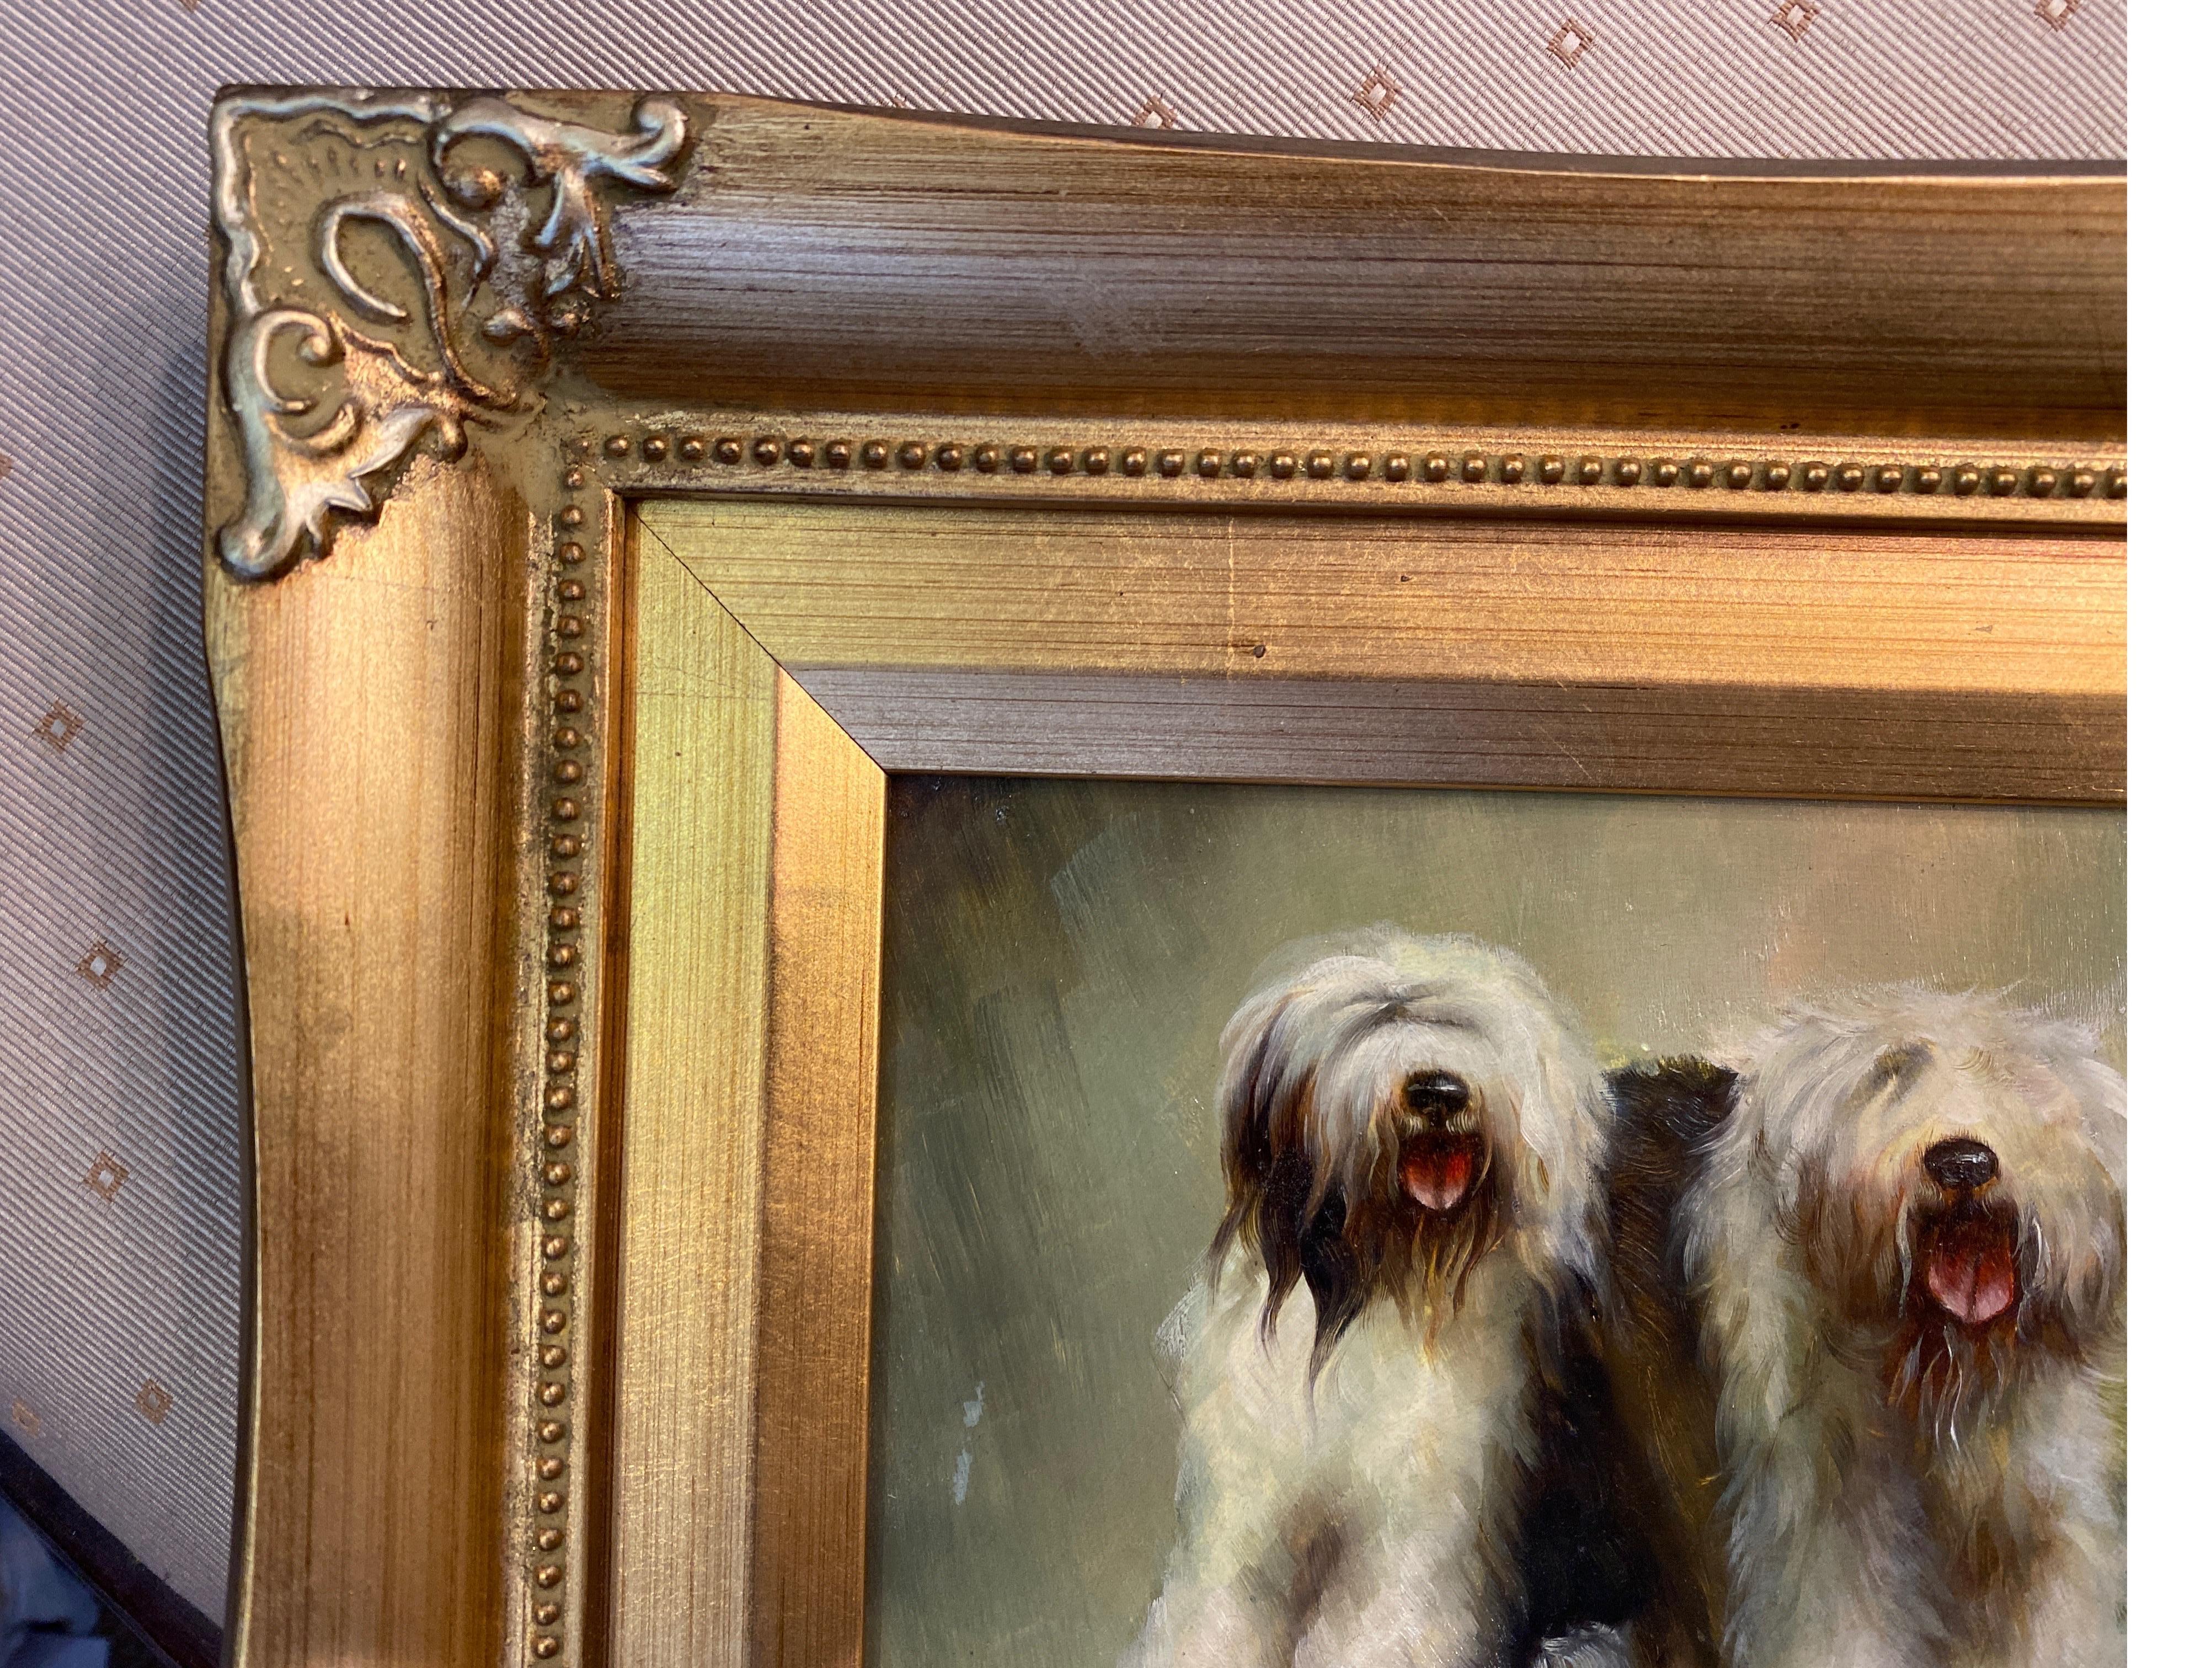 Hand-Painted Original Oil Painting on Board of English Sheep Dogs